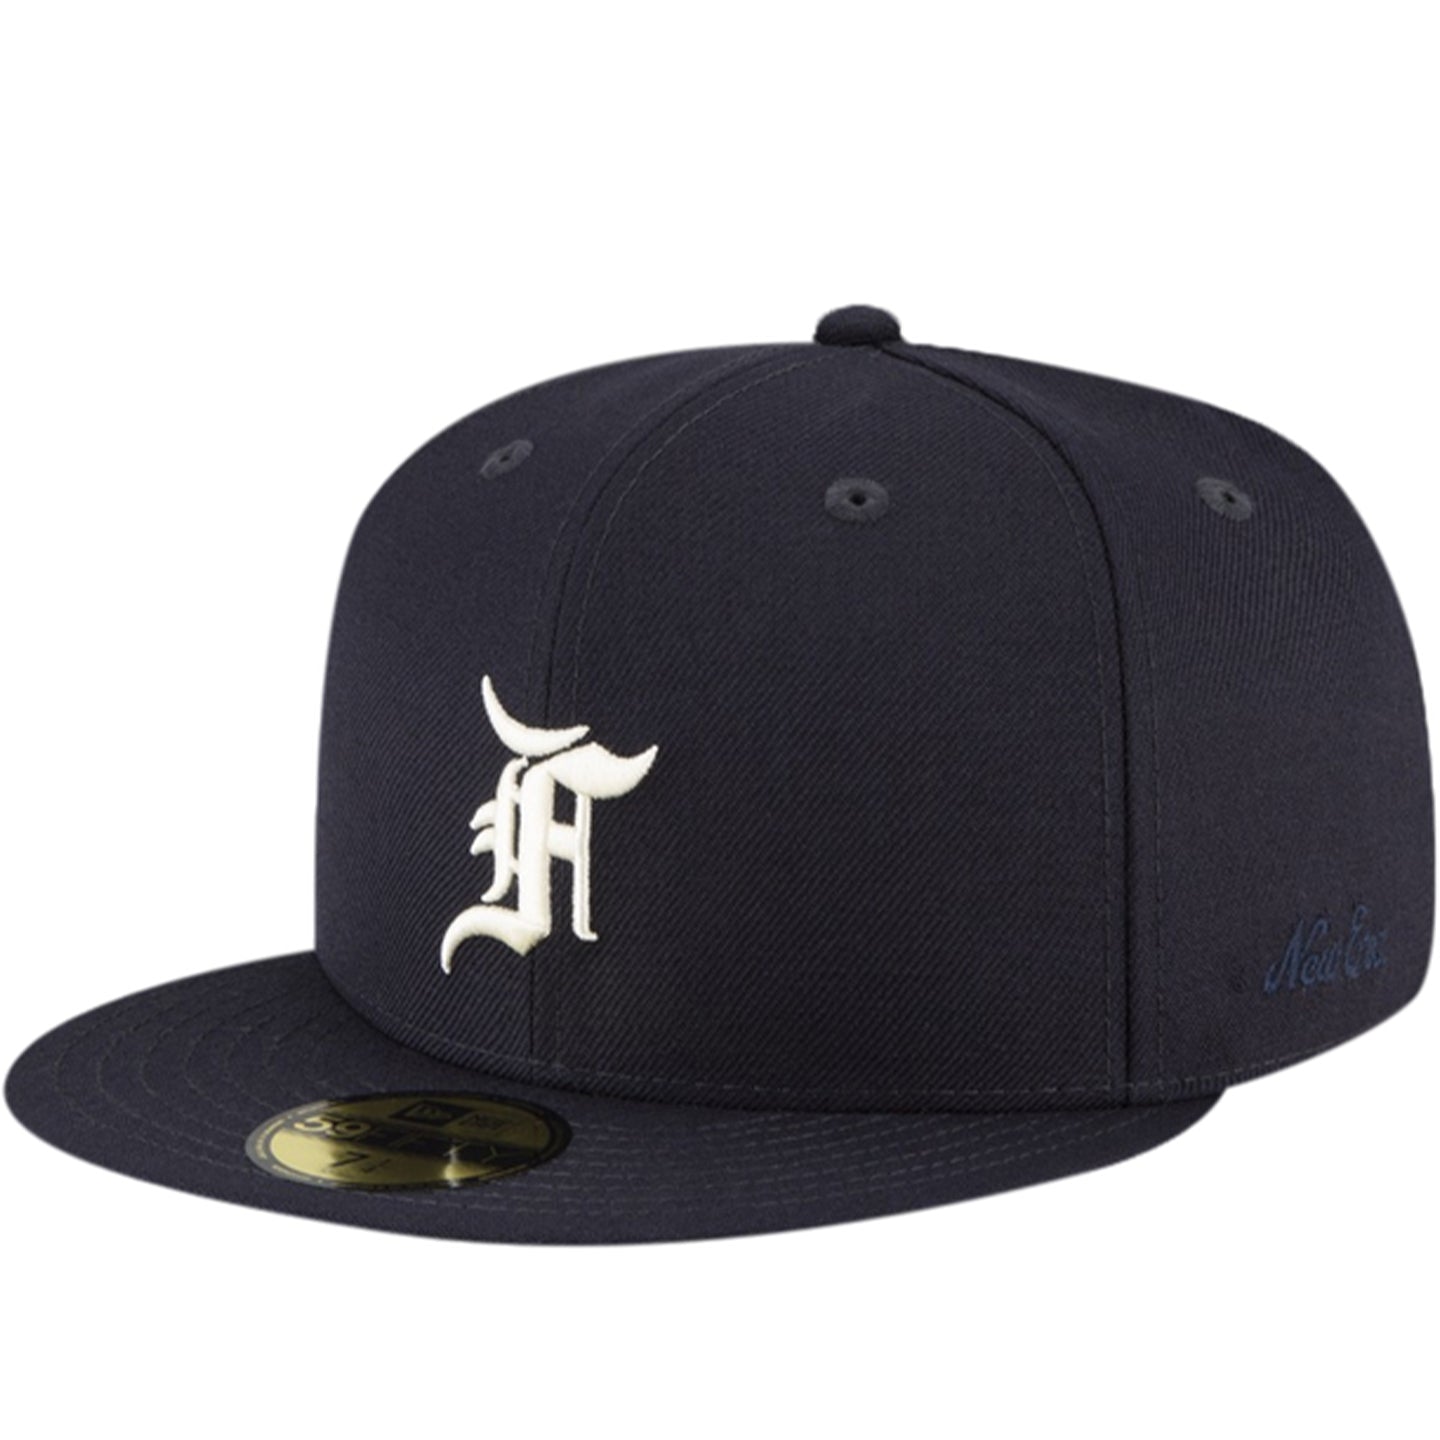 FEAR OF GOD ESSENTIALS NEW ERA FITTED NAVY